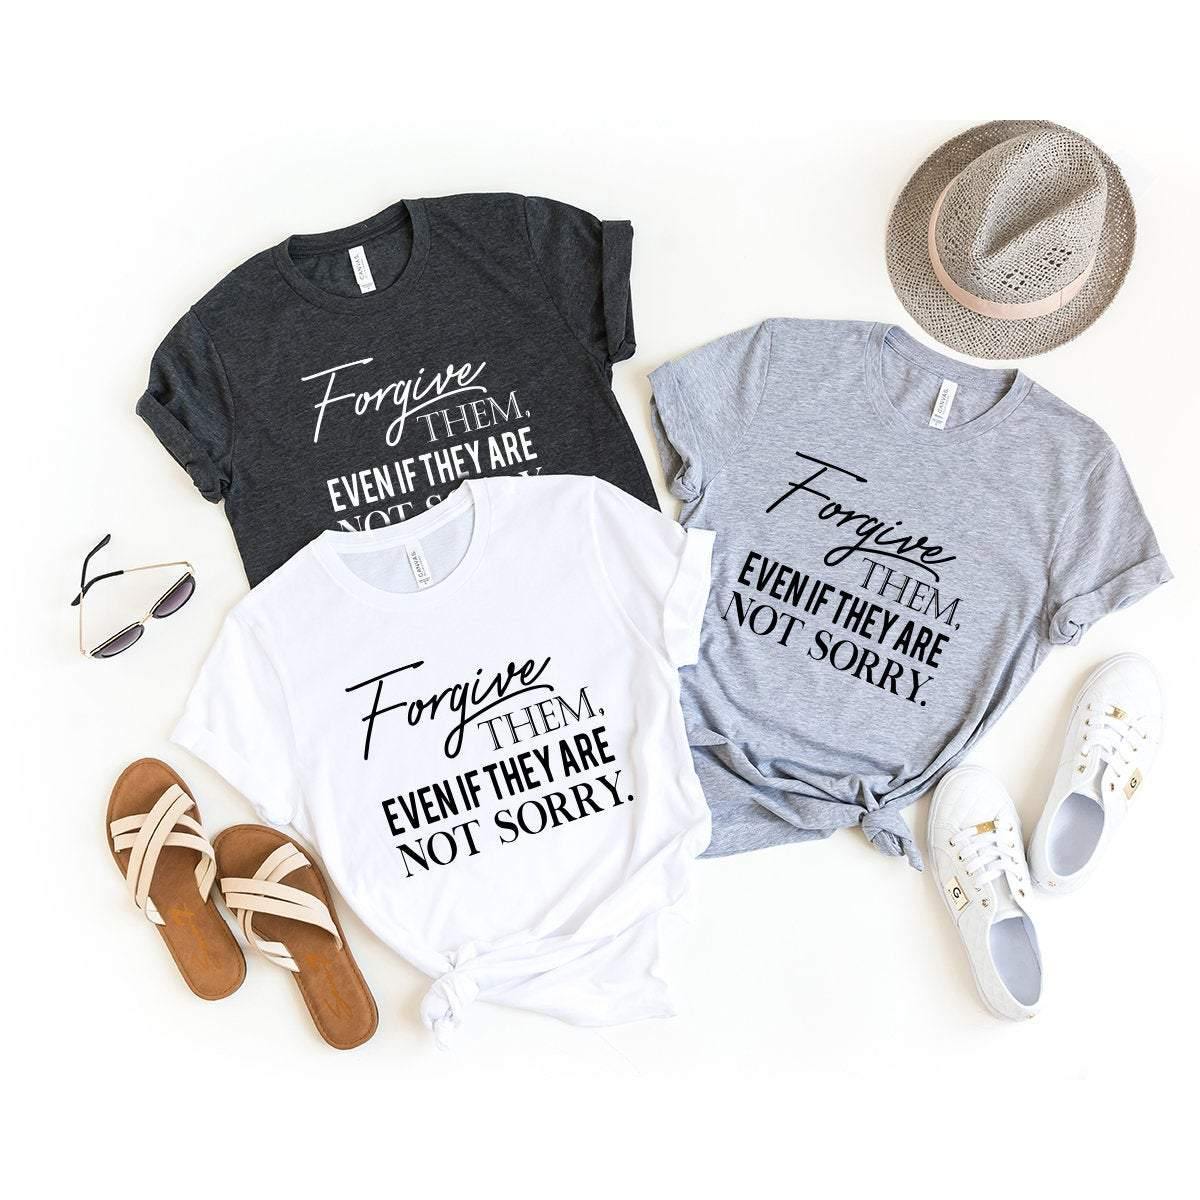 Forgive Them Even If They Are Not Sorry Shirt, Motivational Shirt,Motivation Shirt,Positivity Shirt, Bible Quote Shirt, Jesus, Chirst - Fastdeliverytees.com